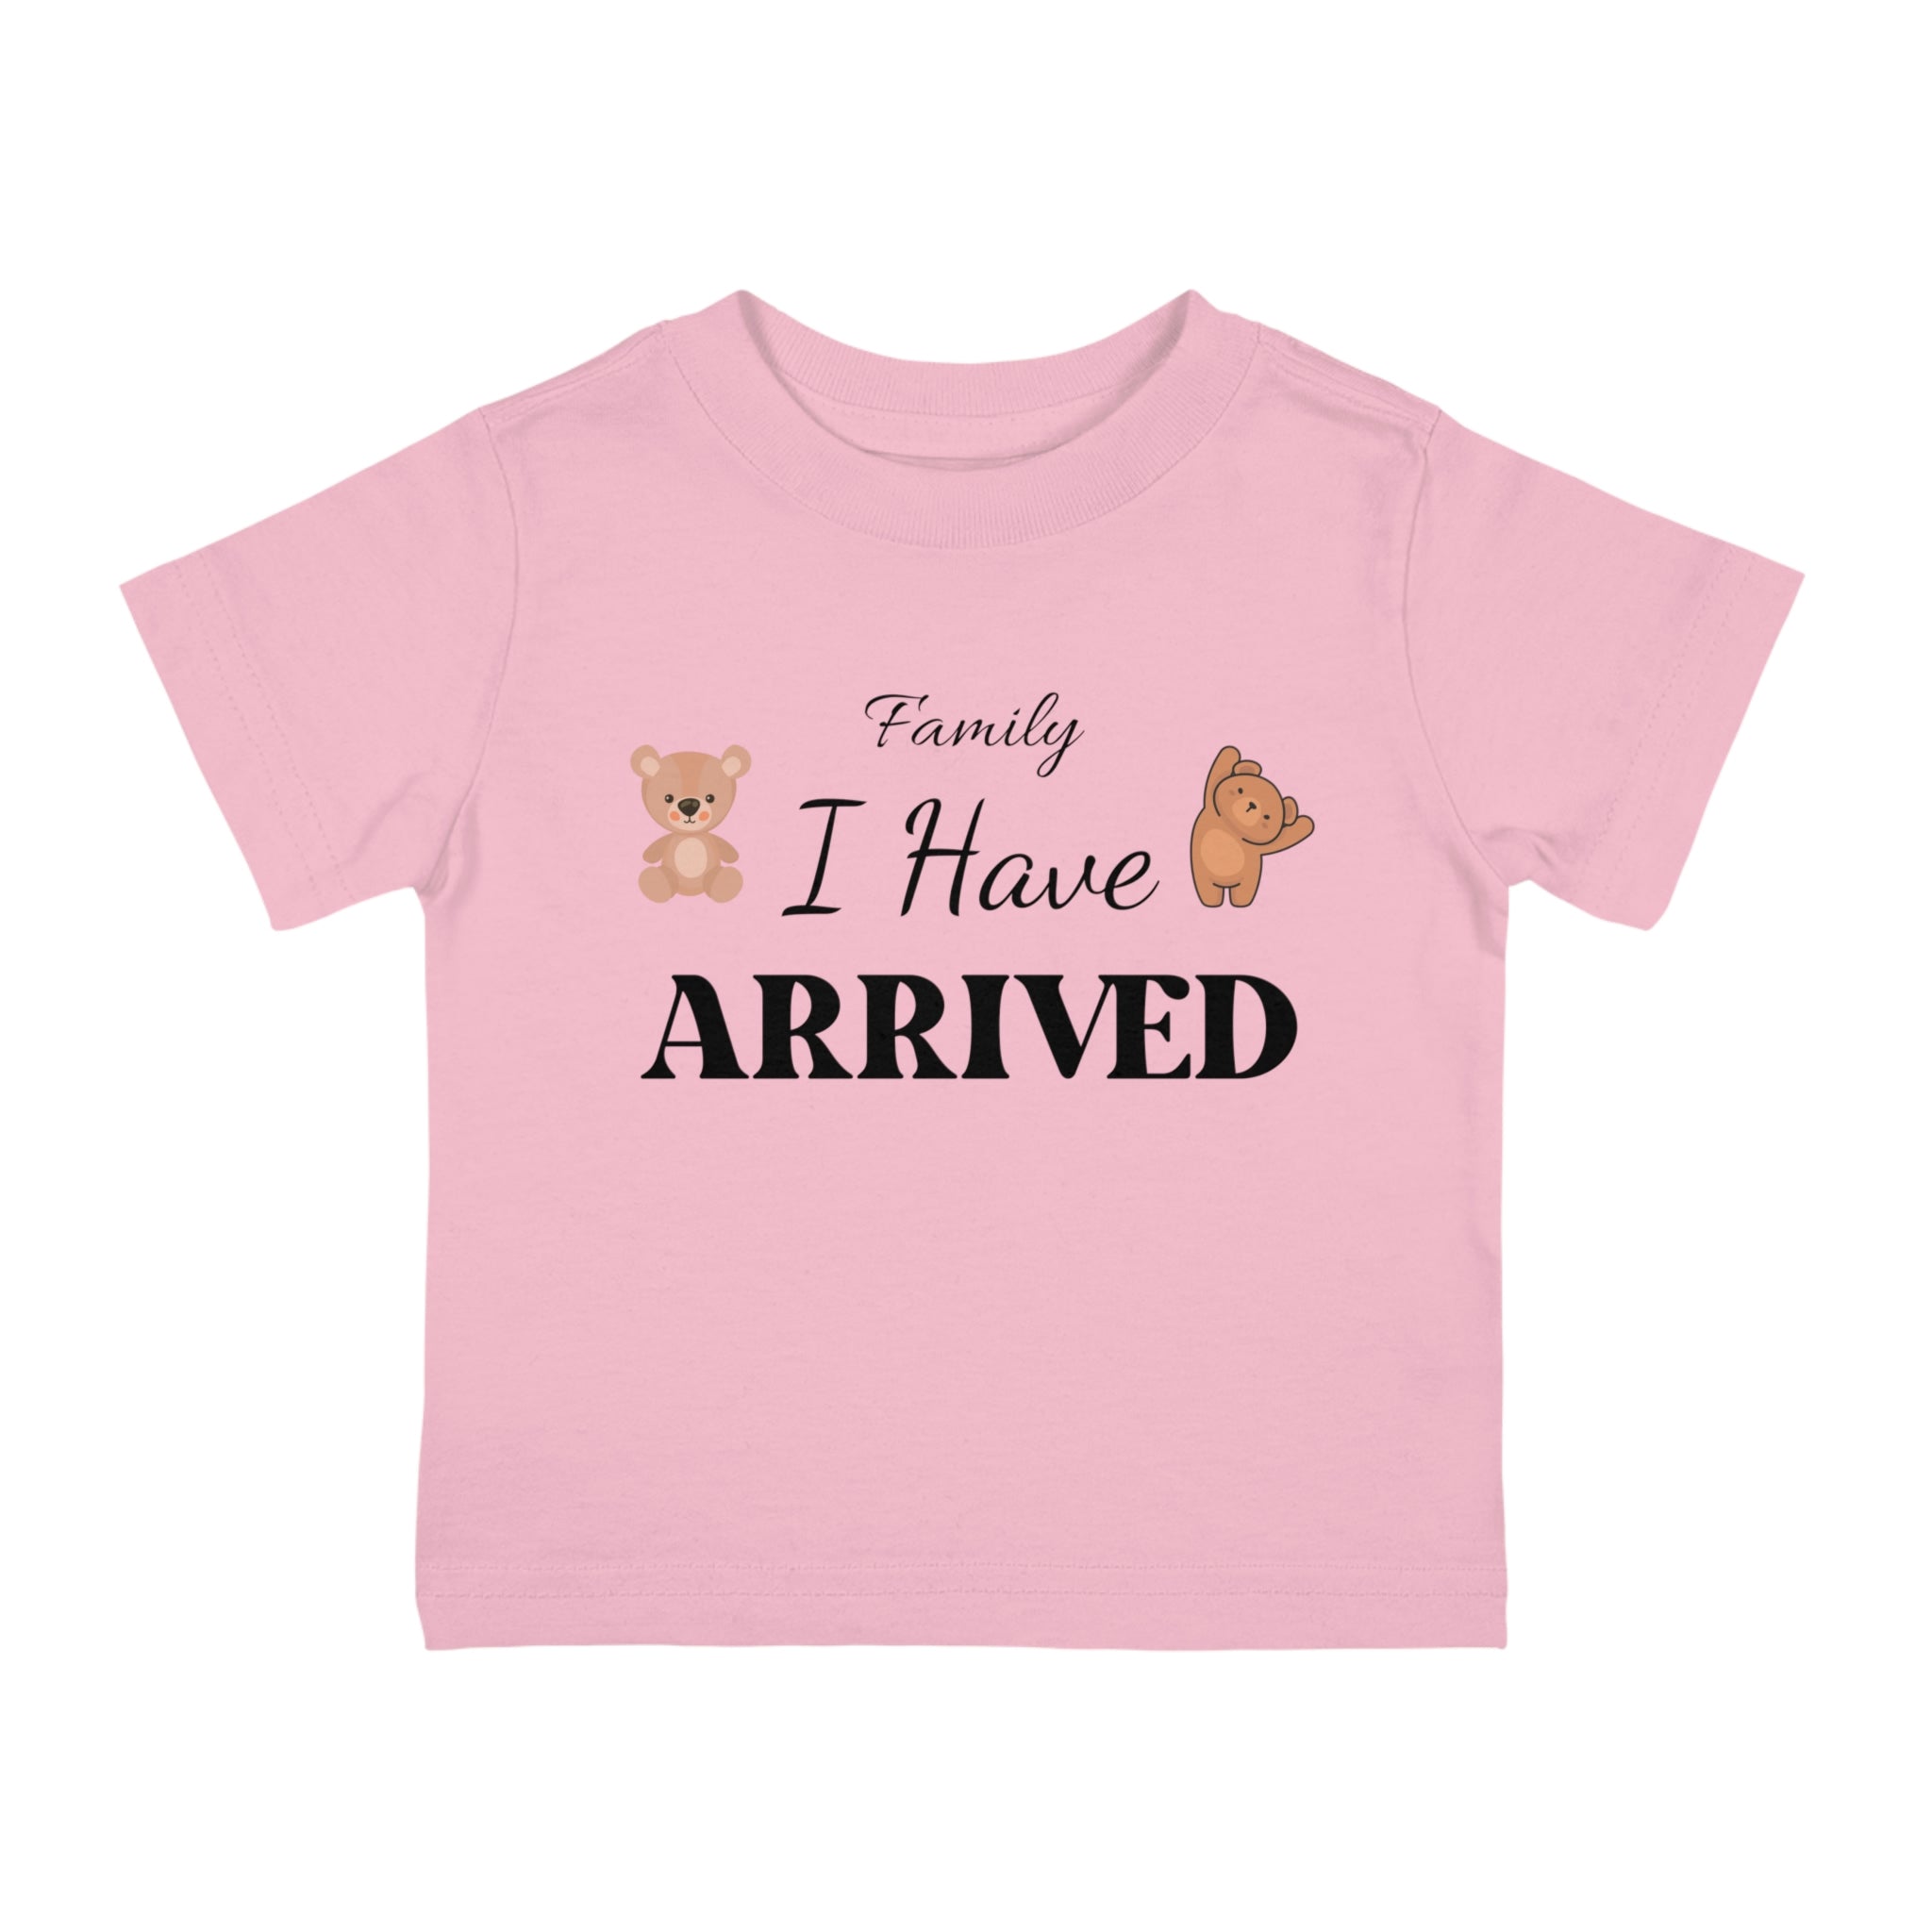 Family I Have Arrived Infant Shirt, Baby Tee, Infant Tee